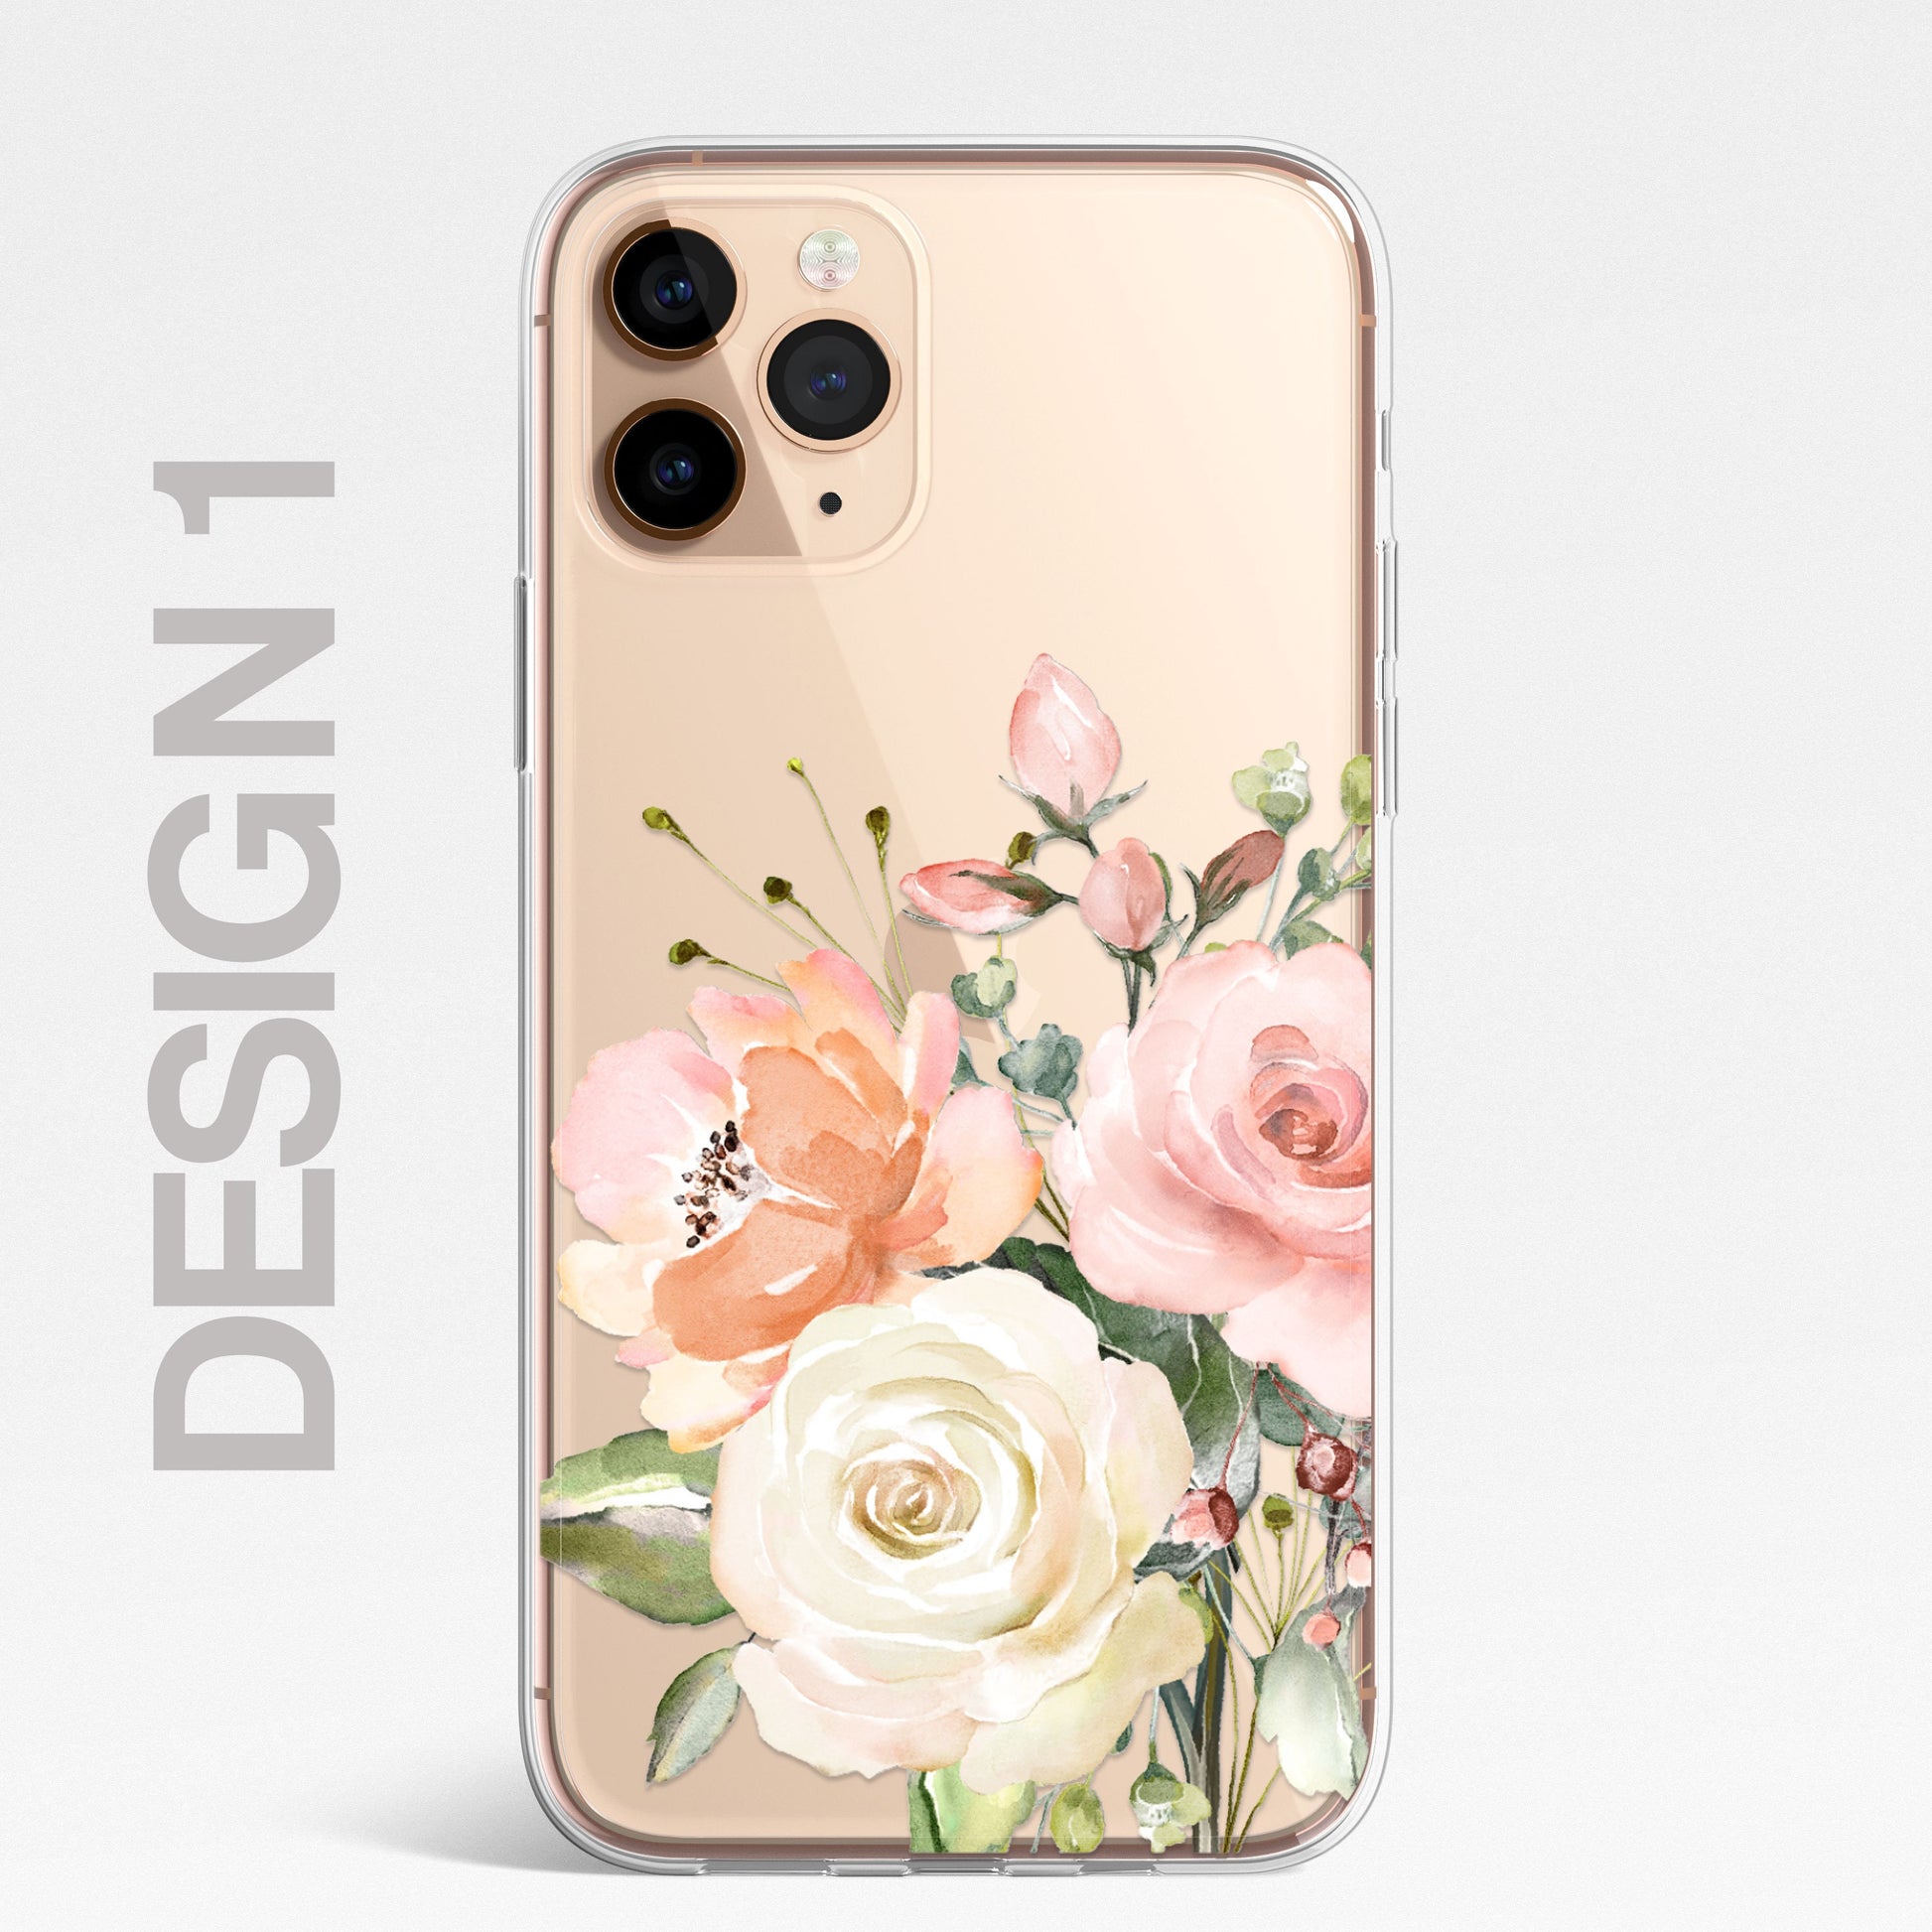 Silicone CLEAR Phone Case Cover Pretty Floral Flowers English Roses Vintage Carnations Gold iPhone 11 12 XR Max Plus Pro Samsung Galaxy